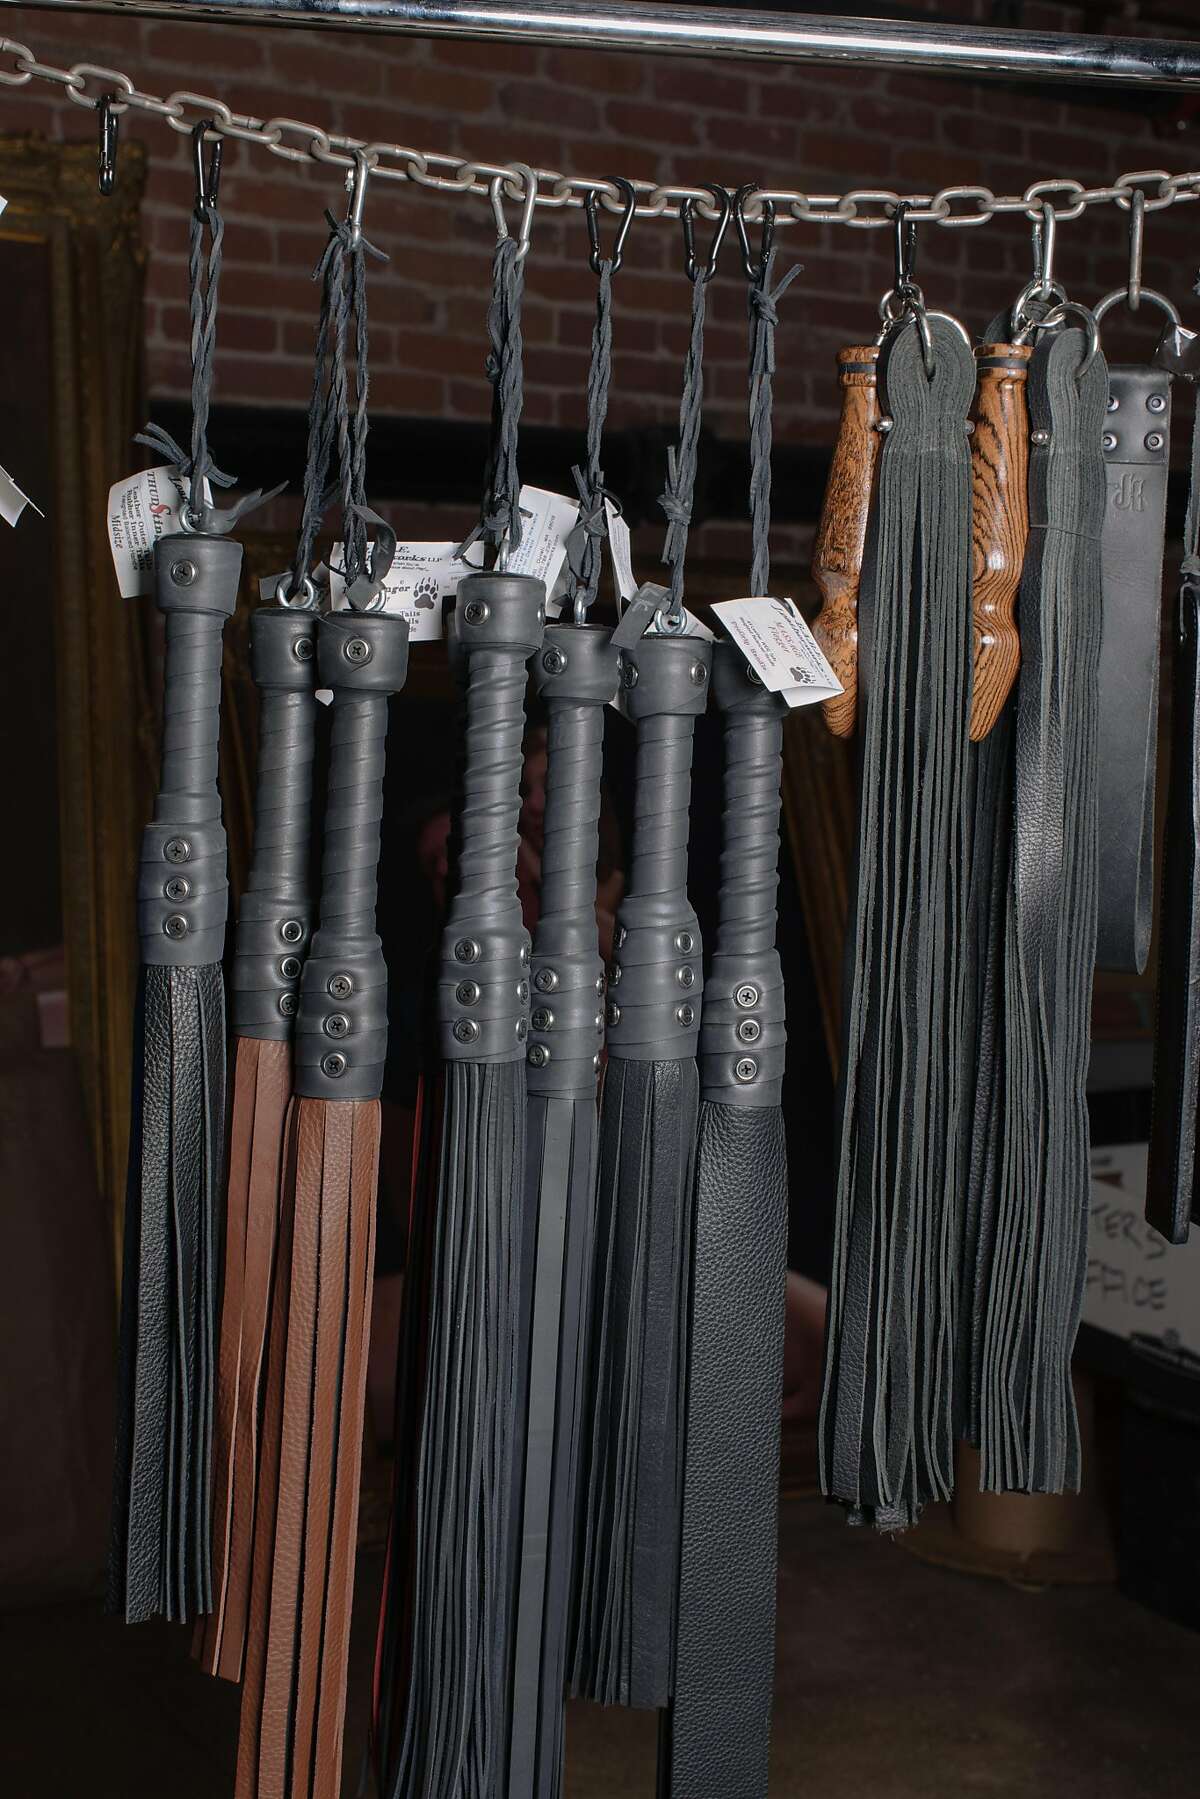 A detail of merchandise in the basement of the new headquarters of Kink.com in San Francisco, California, on May 9th, 2018.